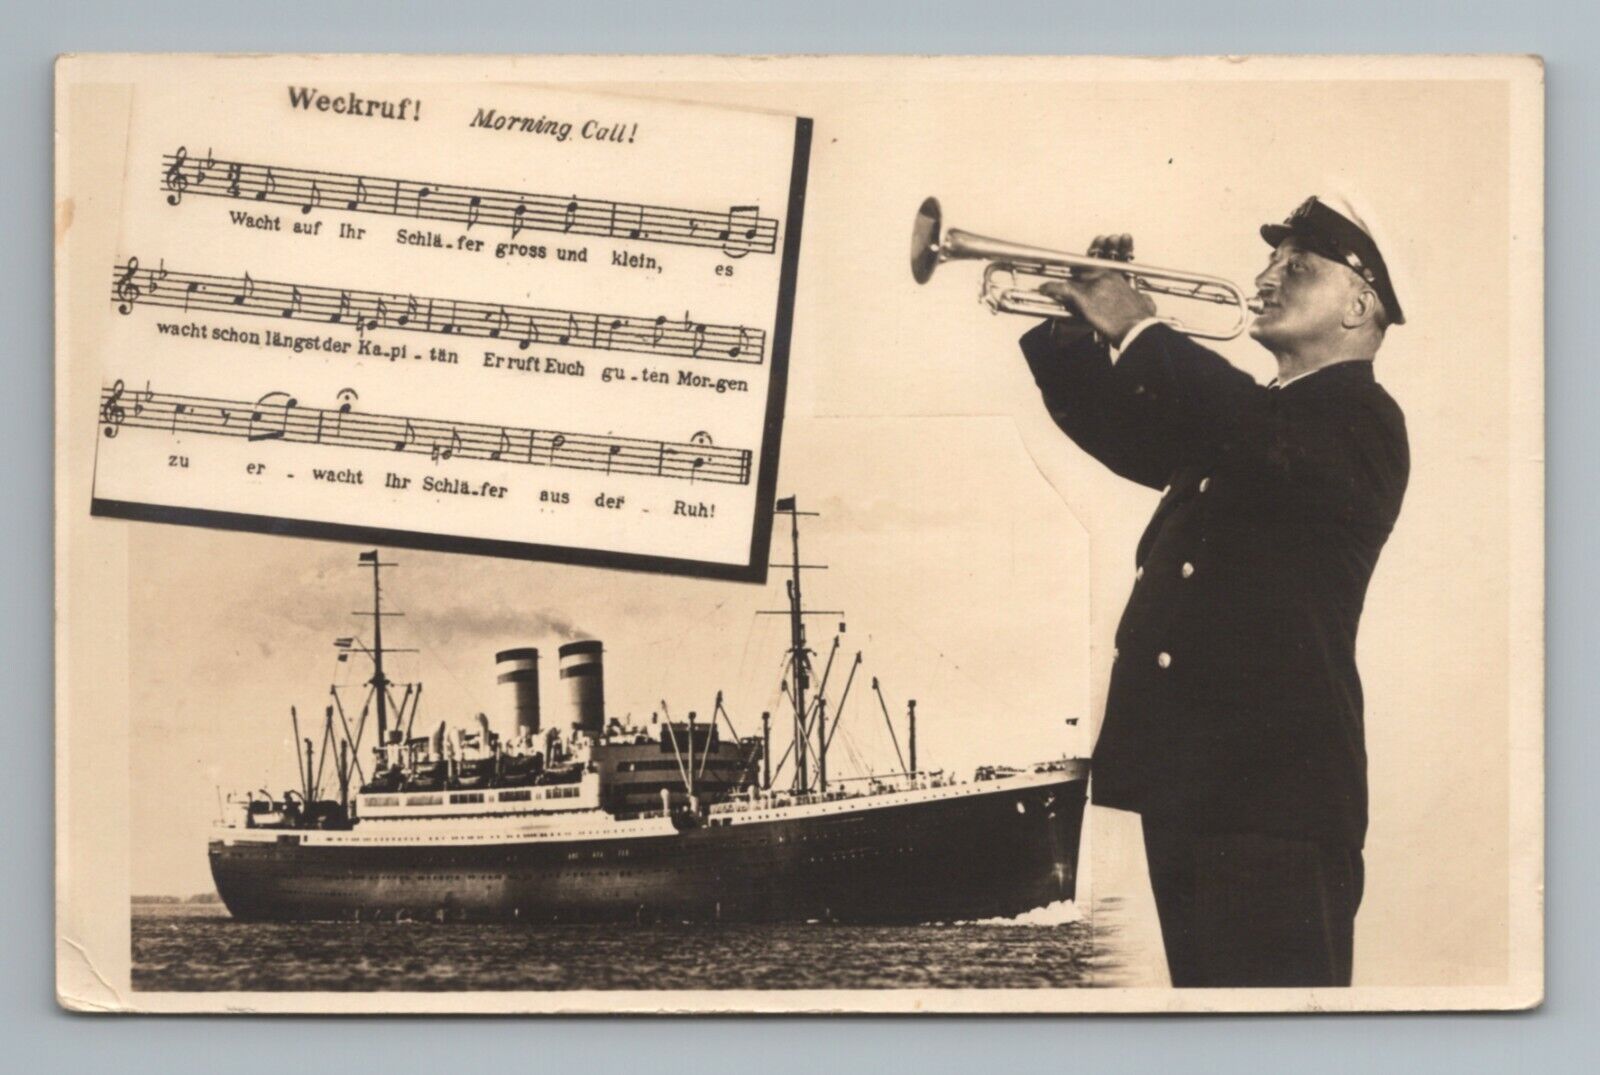 Cruise Ship Morning Call Trumpet Player Weckruf Song RPPC Photo Postcard